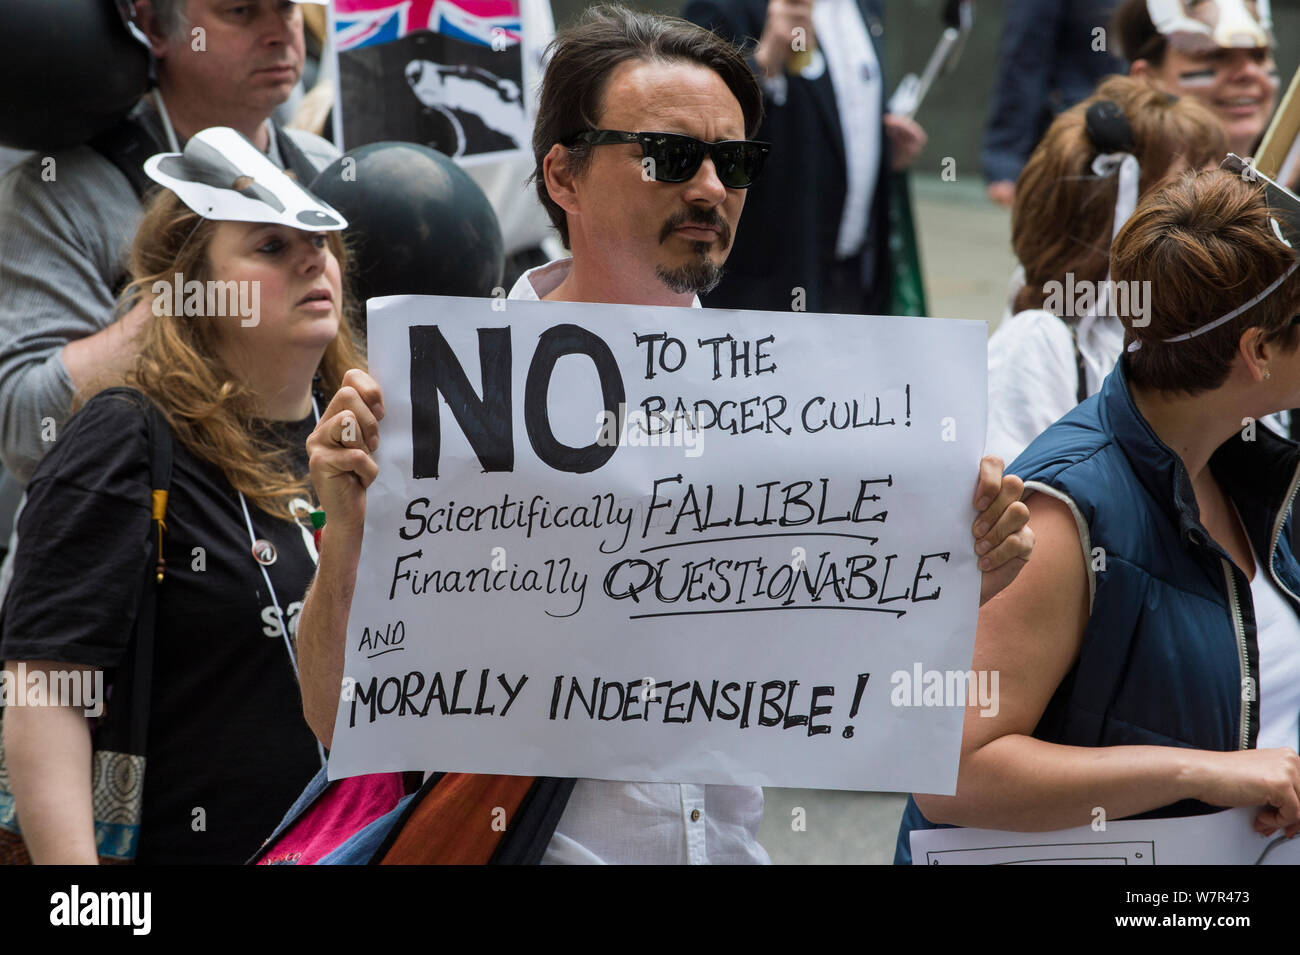 Man holding sign which says 'No to the badger cull, Scientifically fallable, Financially questionable and morally indiffensible' at anti badger cull march, London 1st June 2013 Stock Photo